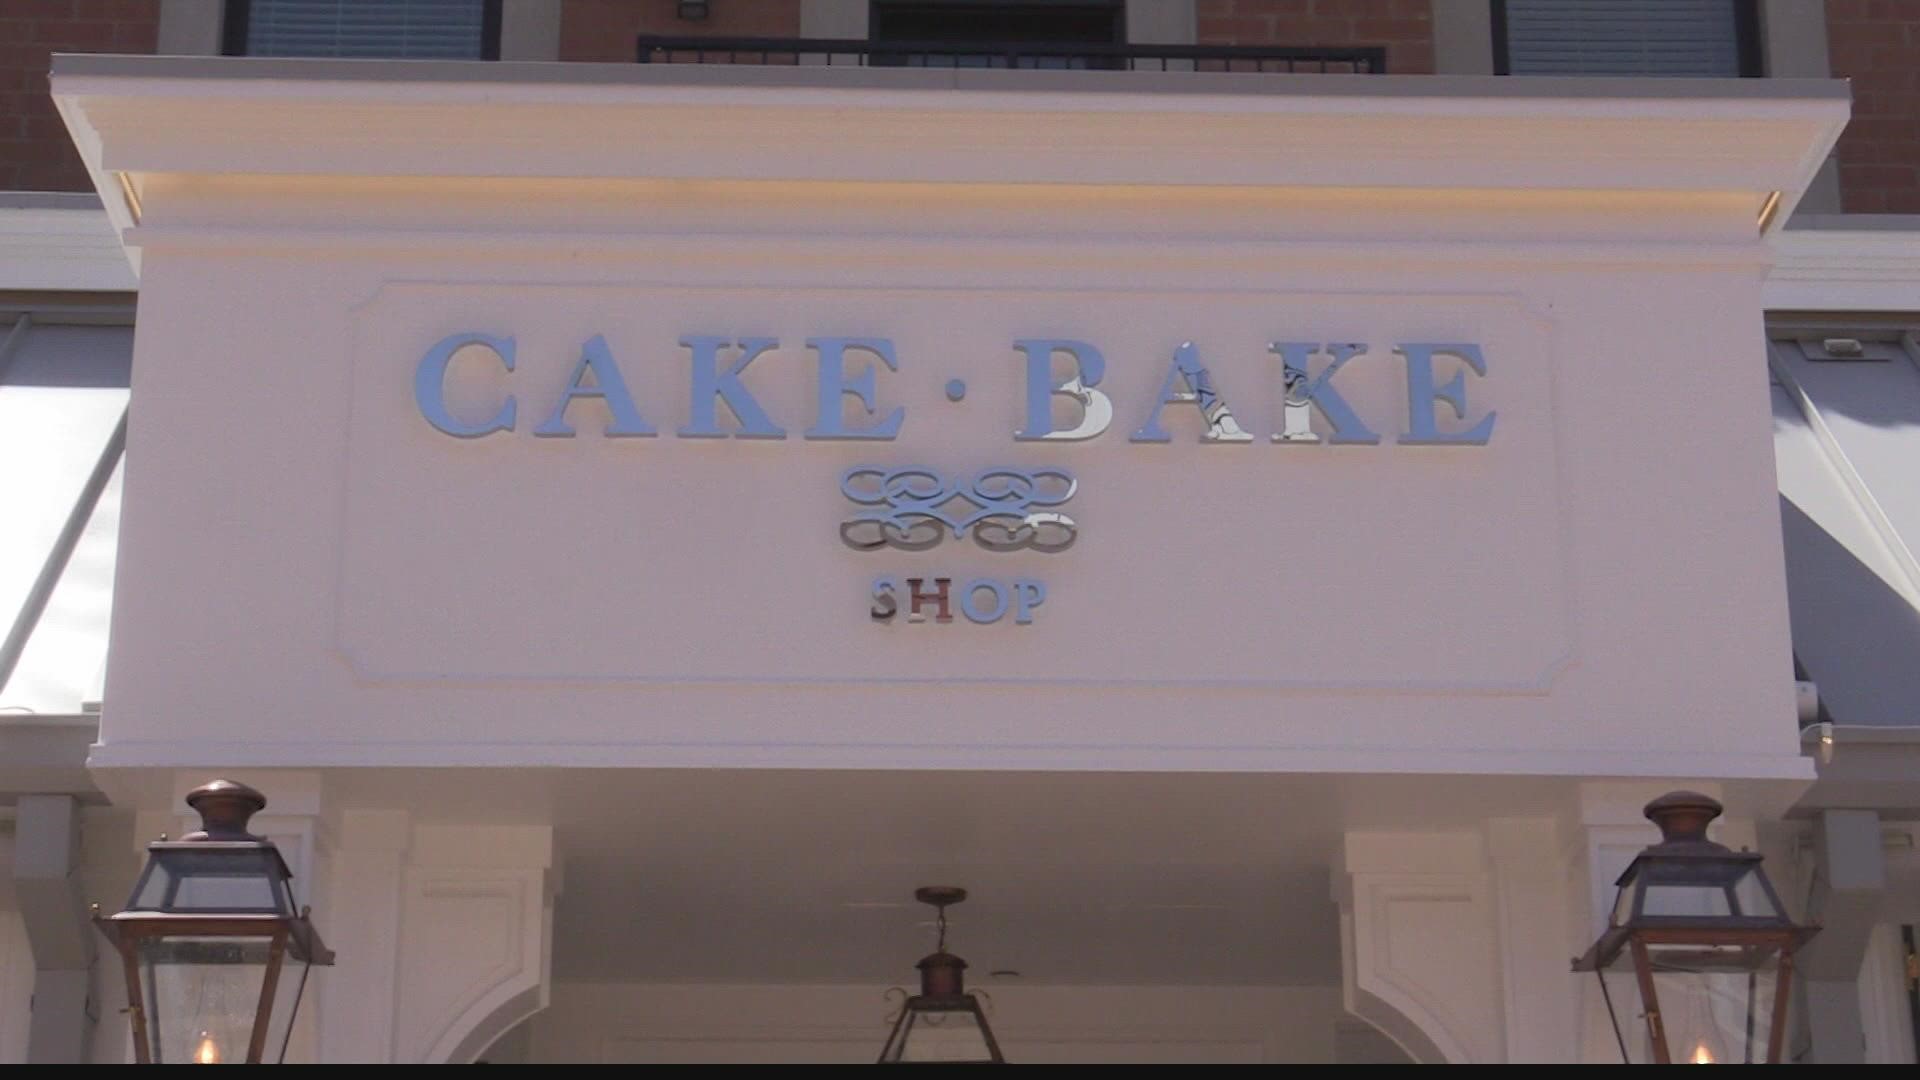 Another Cake Bake is scheduled to open on Disney's Boardwalk in 2023.